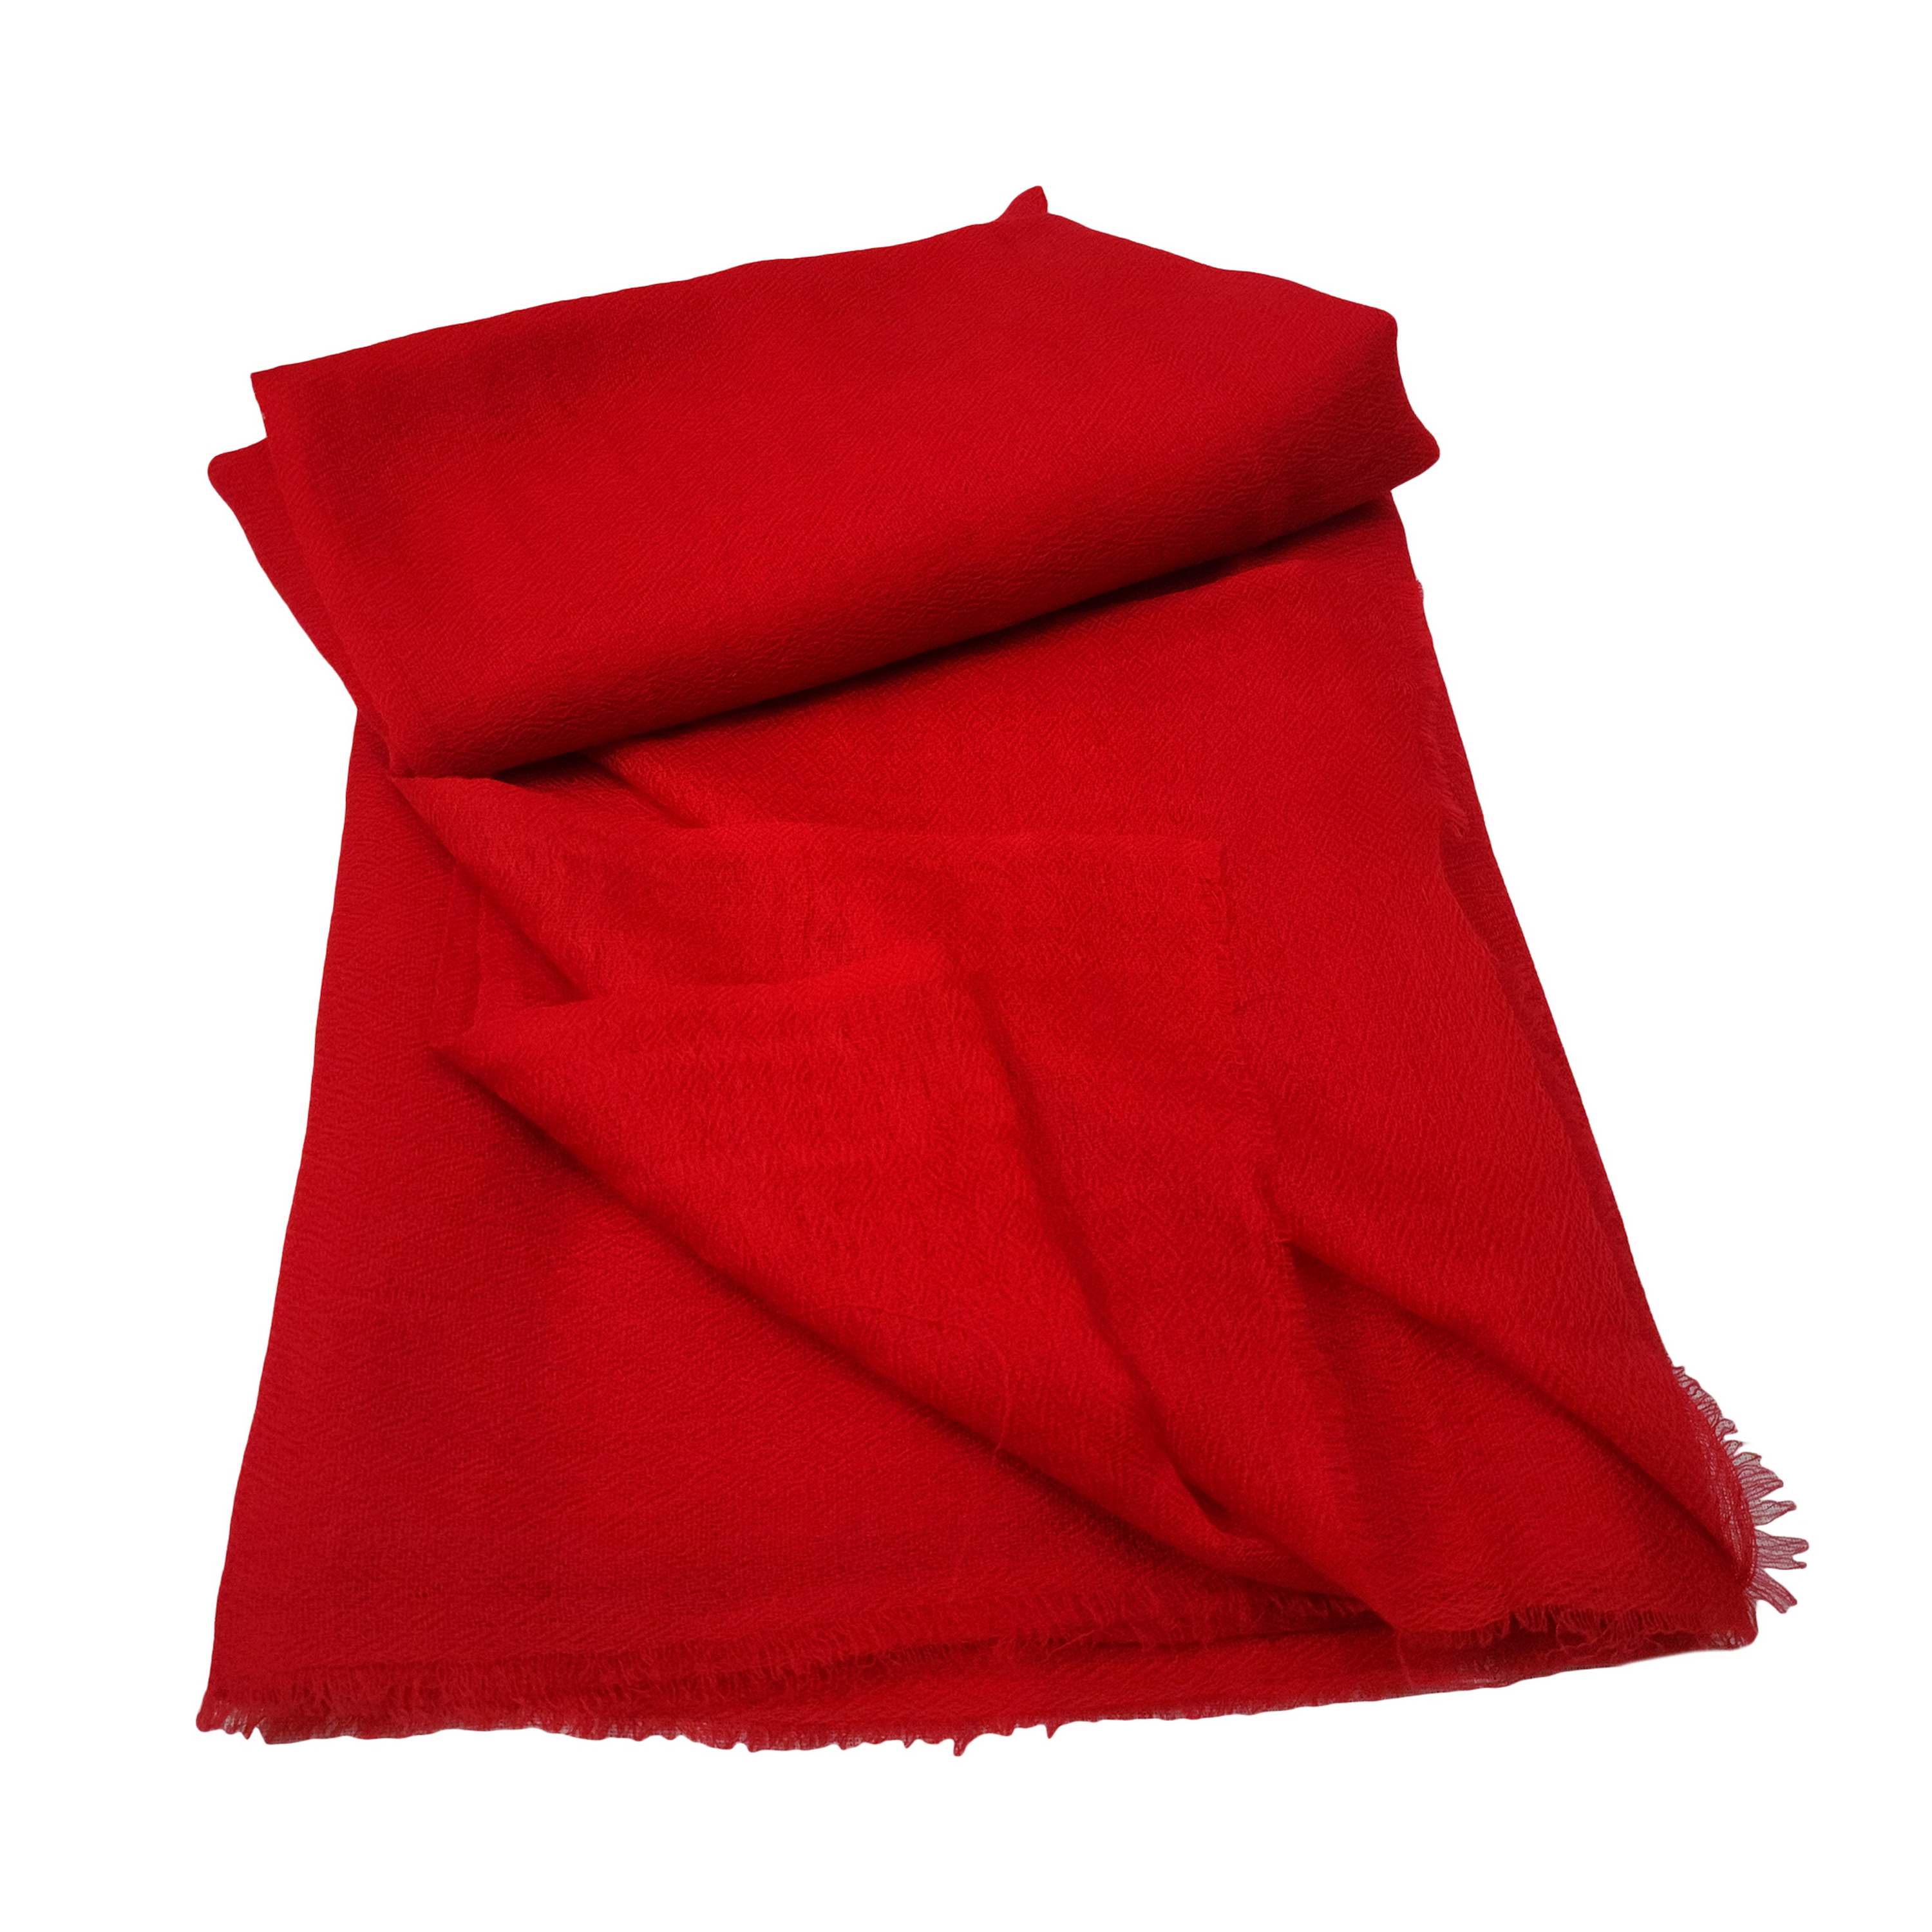 Ring Shawl, A Thin, Soft, And Light Shawl For All-weather Use, Two-ply Wool, Color red